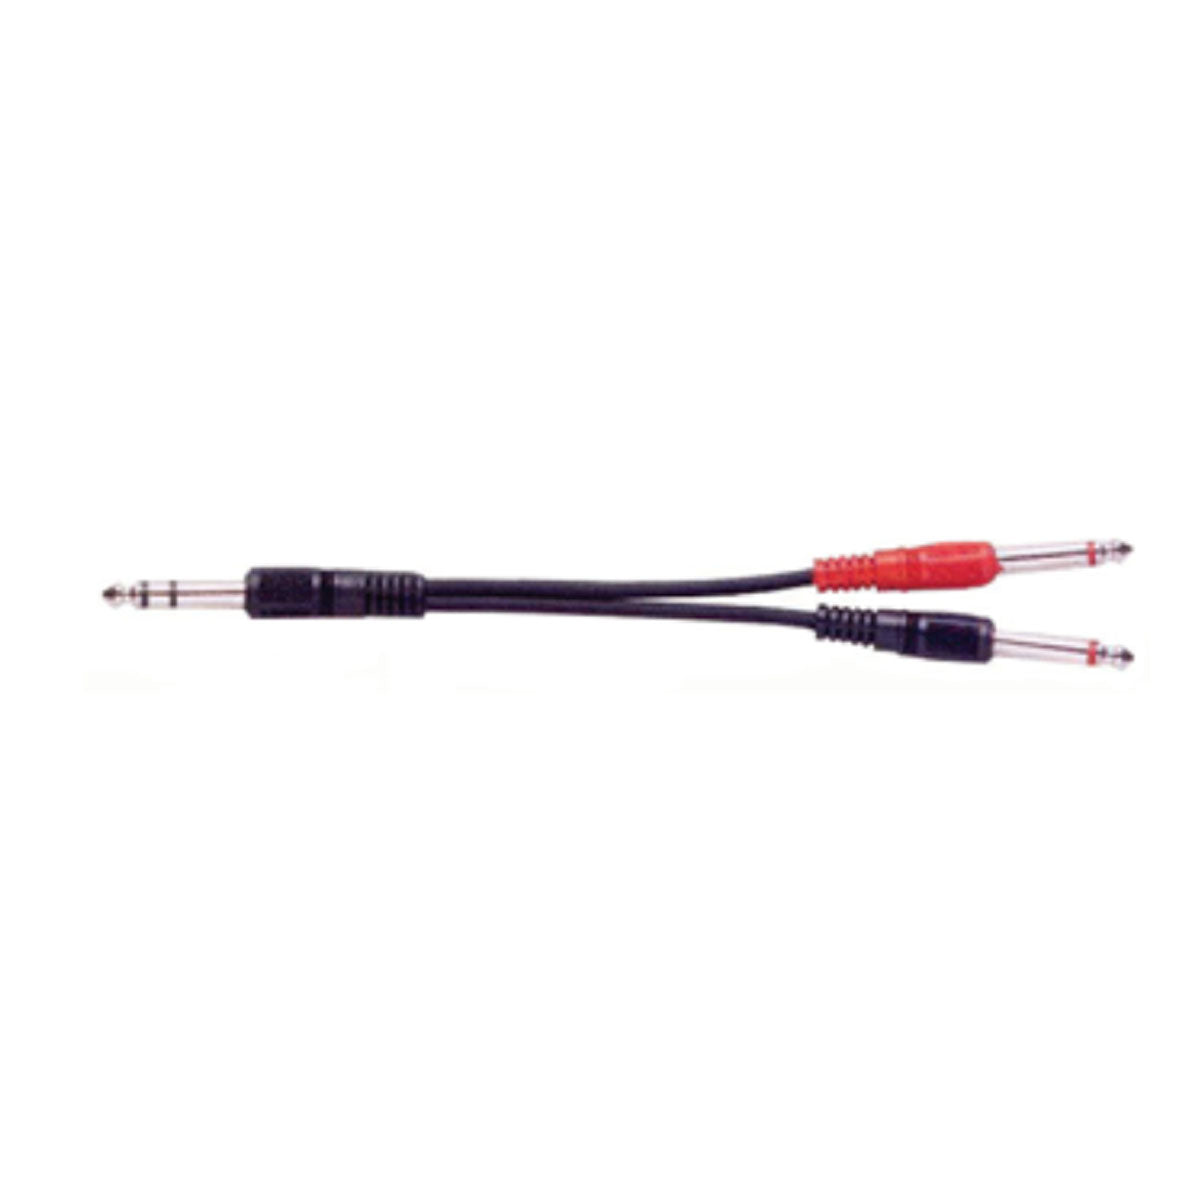 Australasian YCB3S 6.3 Stereo Jack to 2 x 6.3 Mono Jack Cable